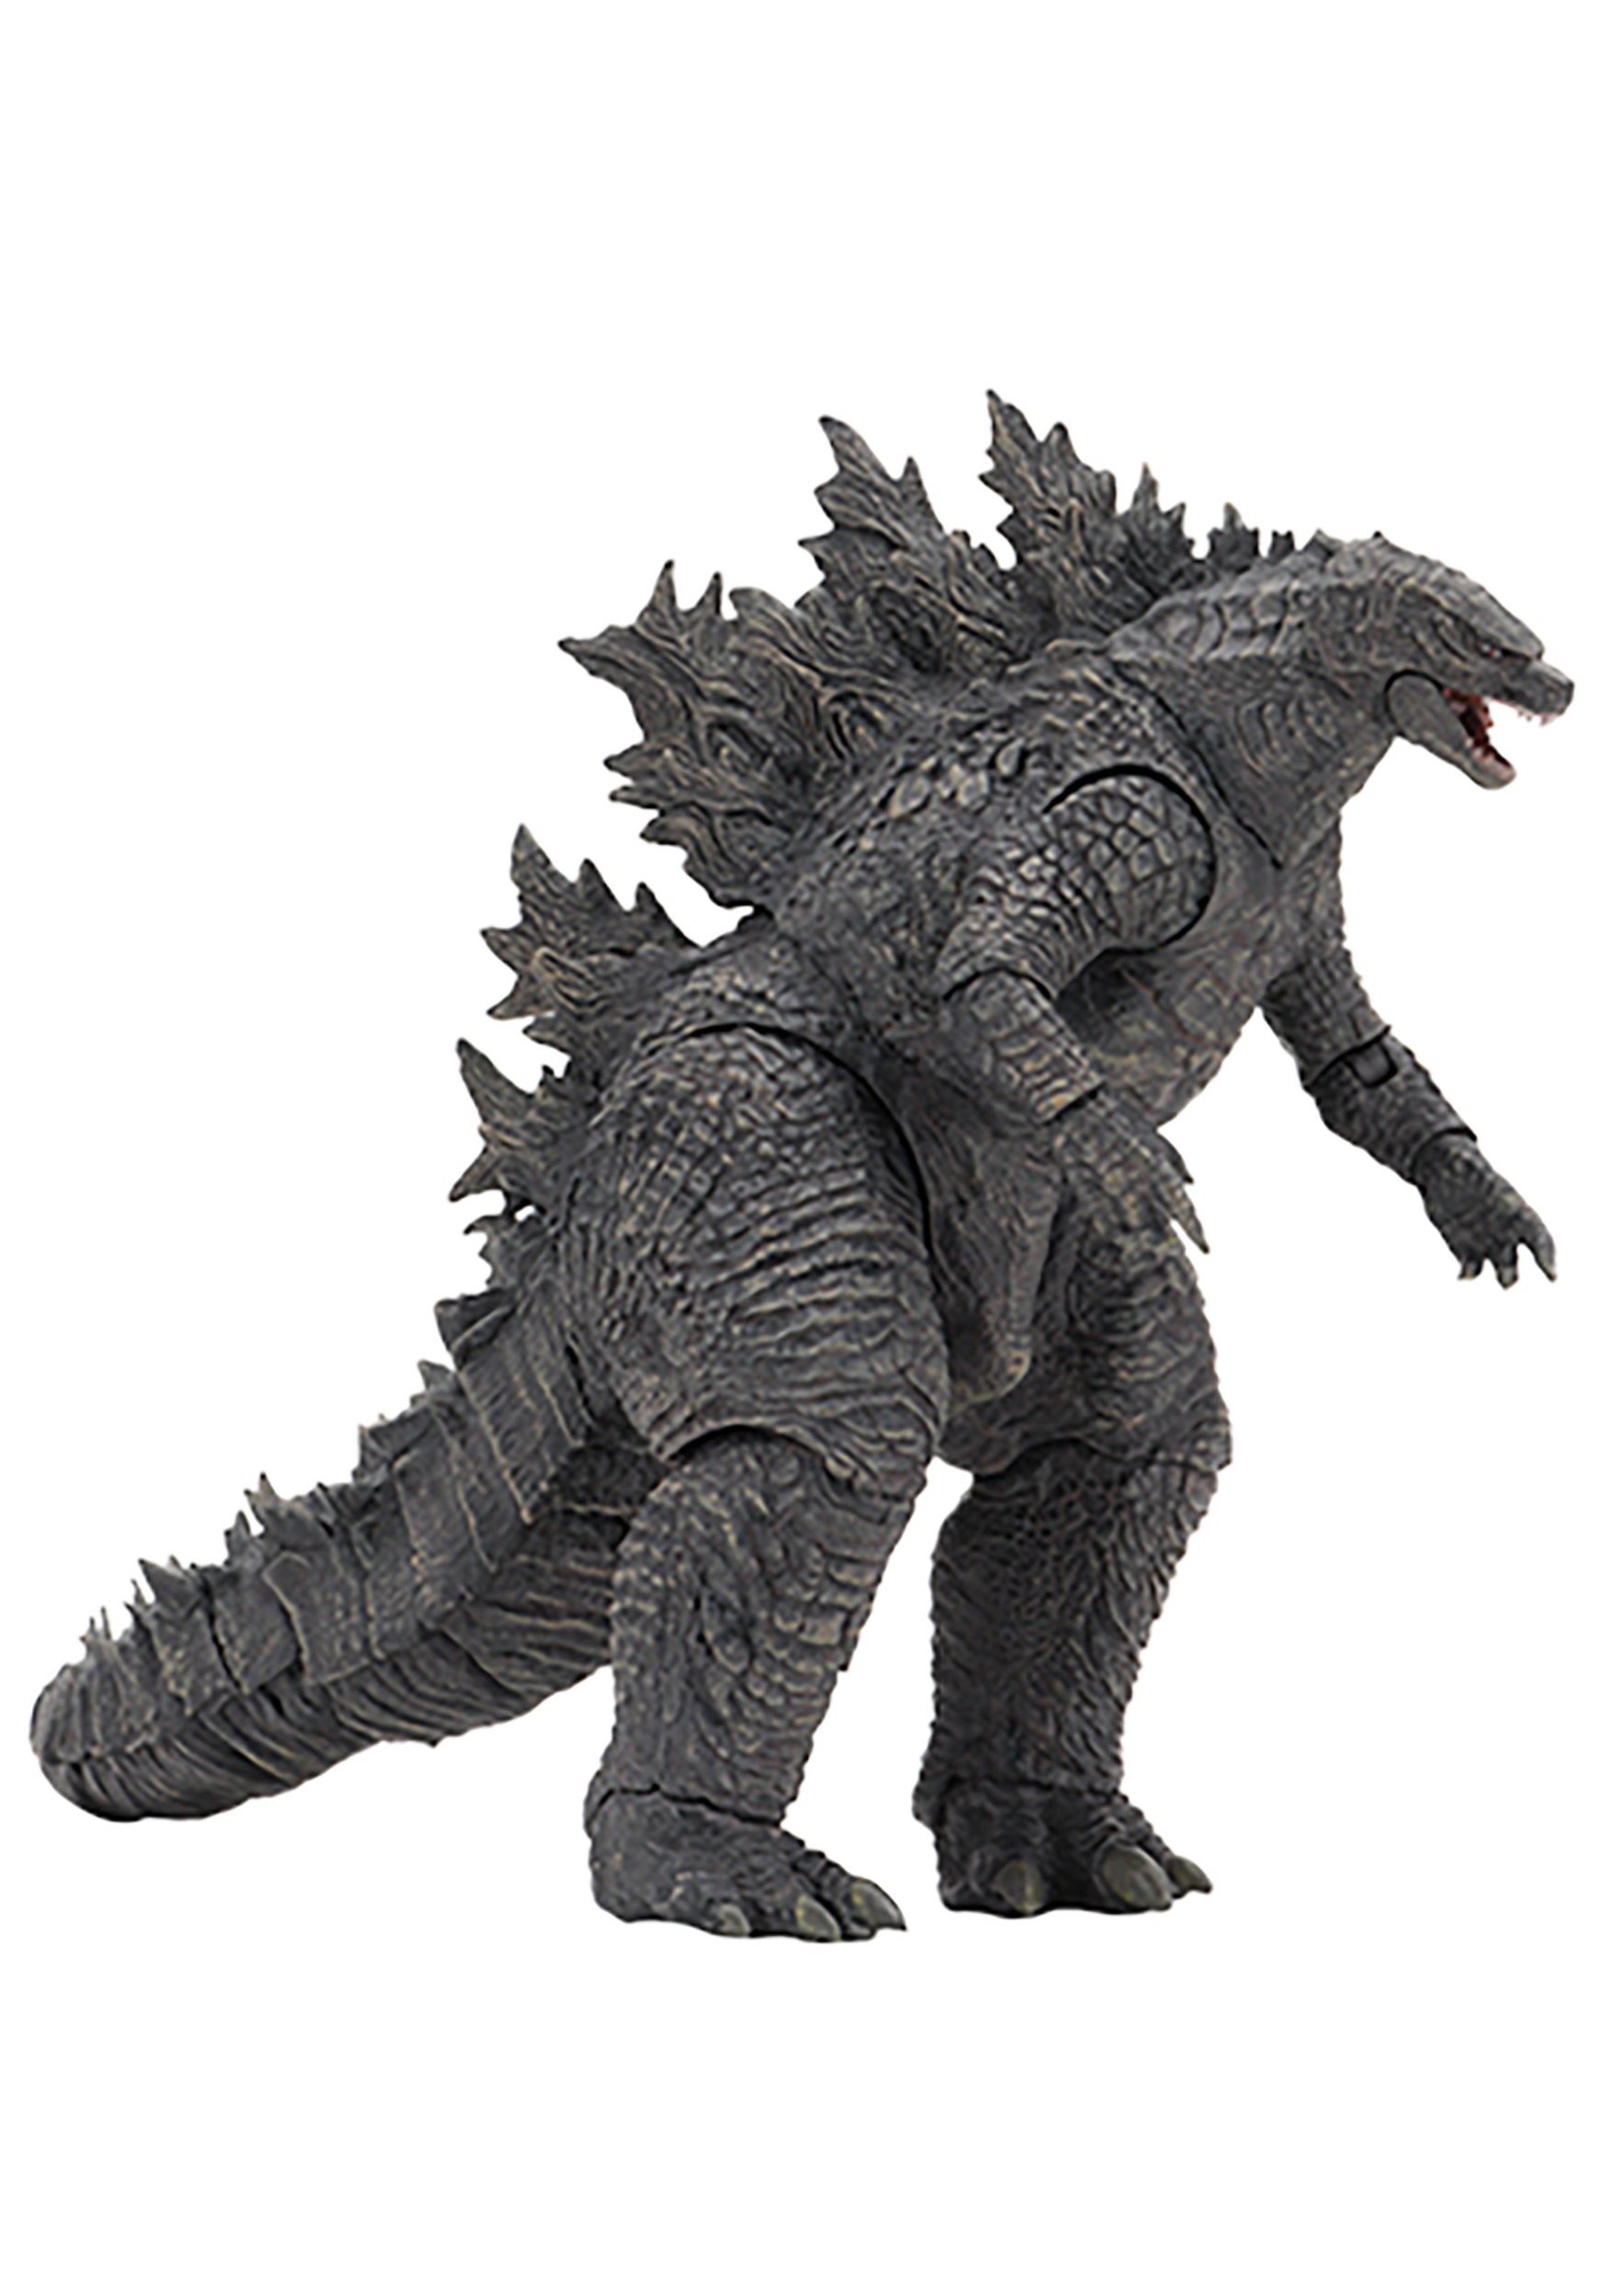 Godzilla King of the Monsters 12" Head to Tail Collectible ...